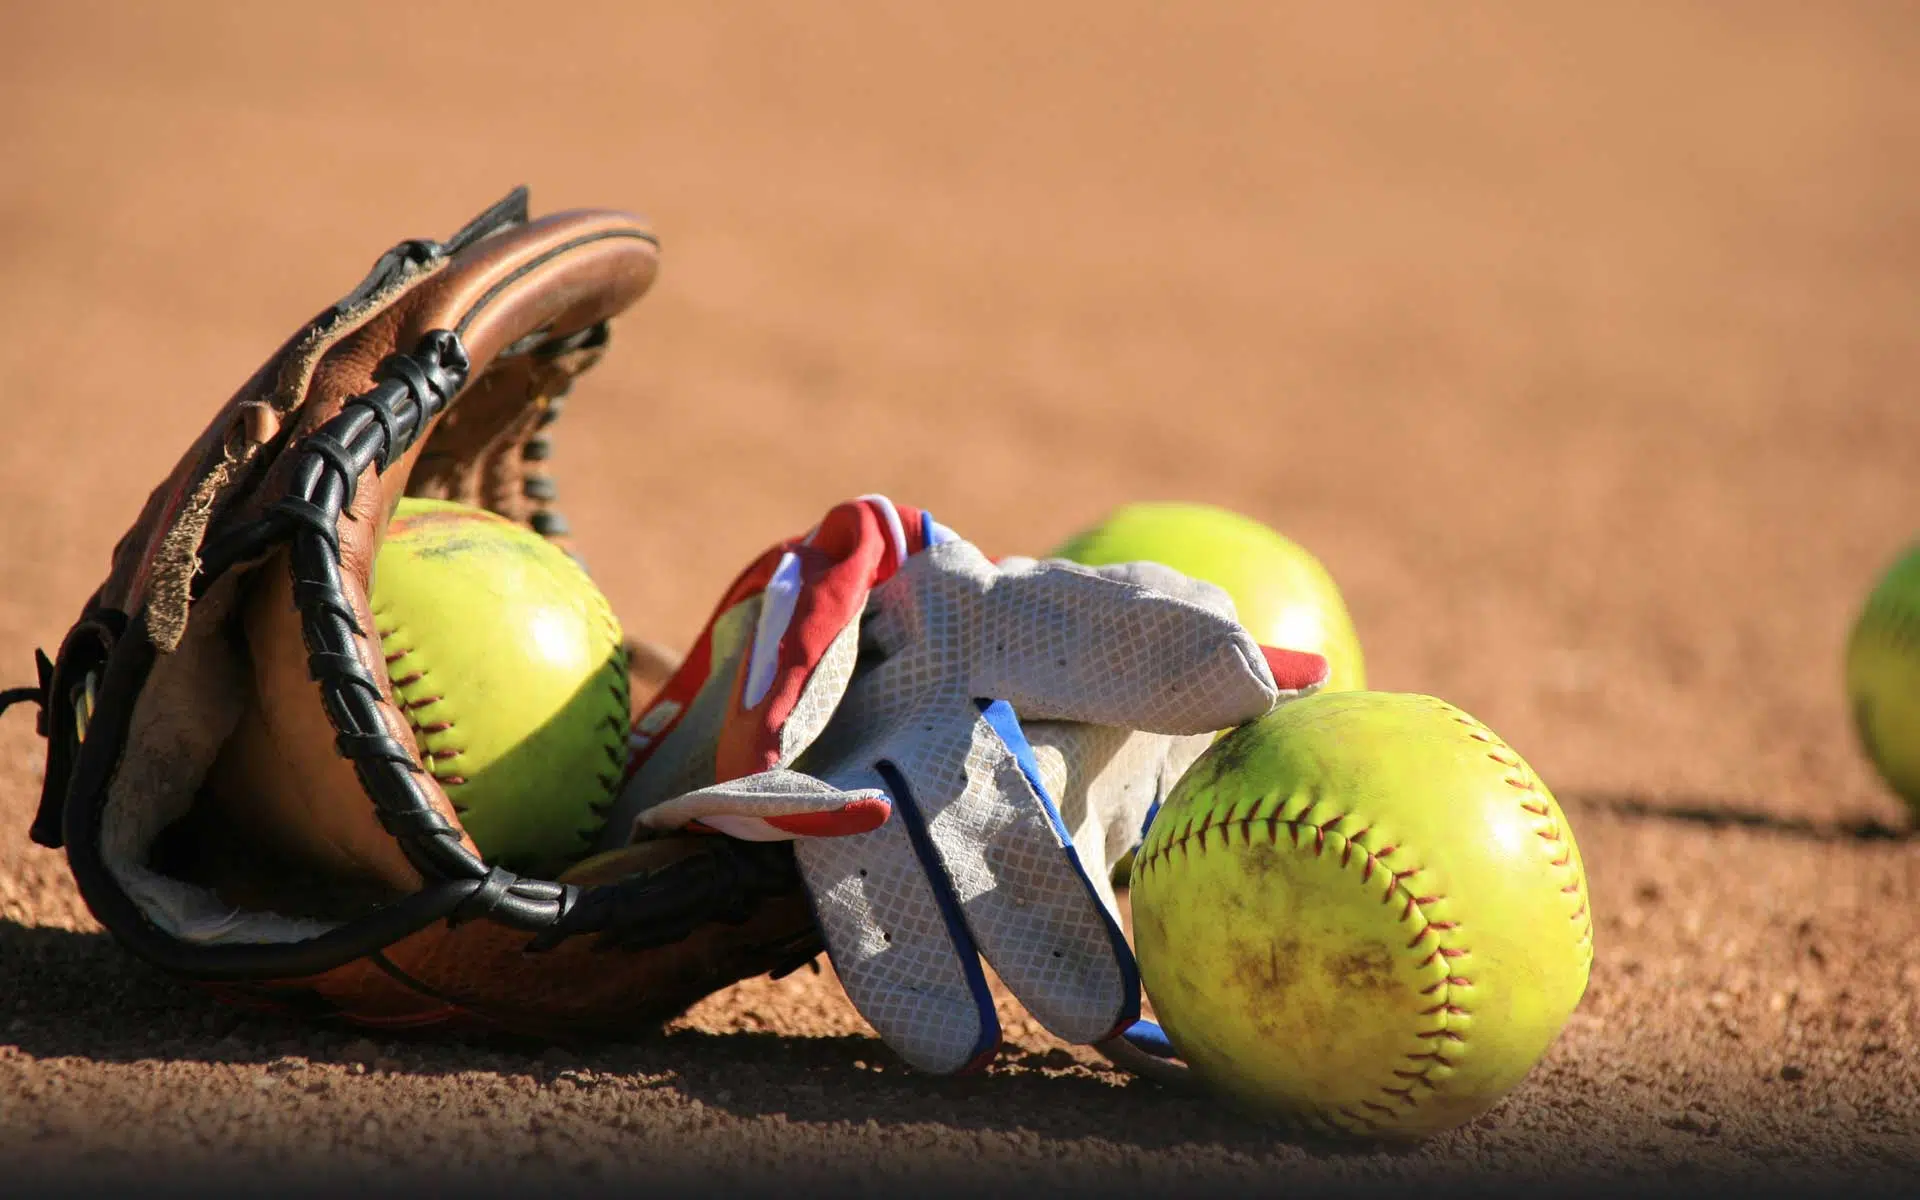 Hali Graves Memorial Softball Tournament on this weekend